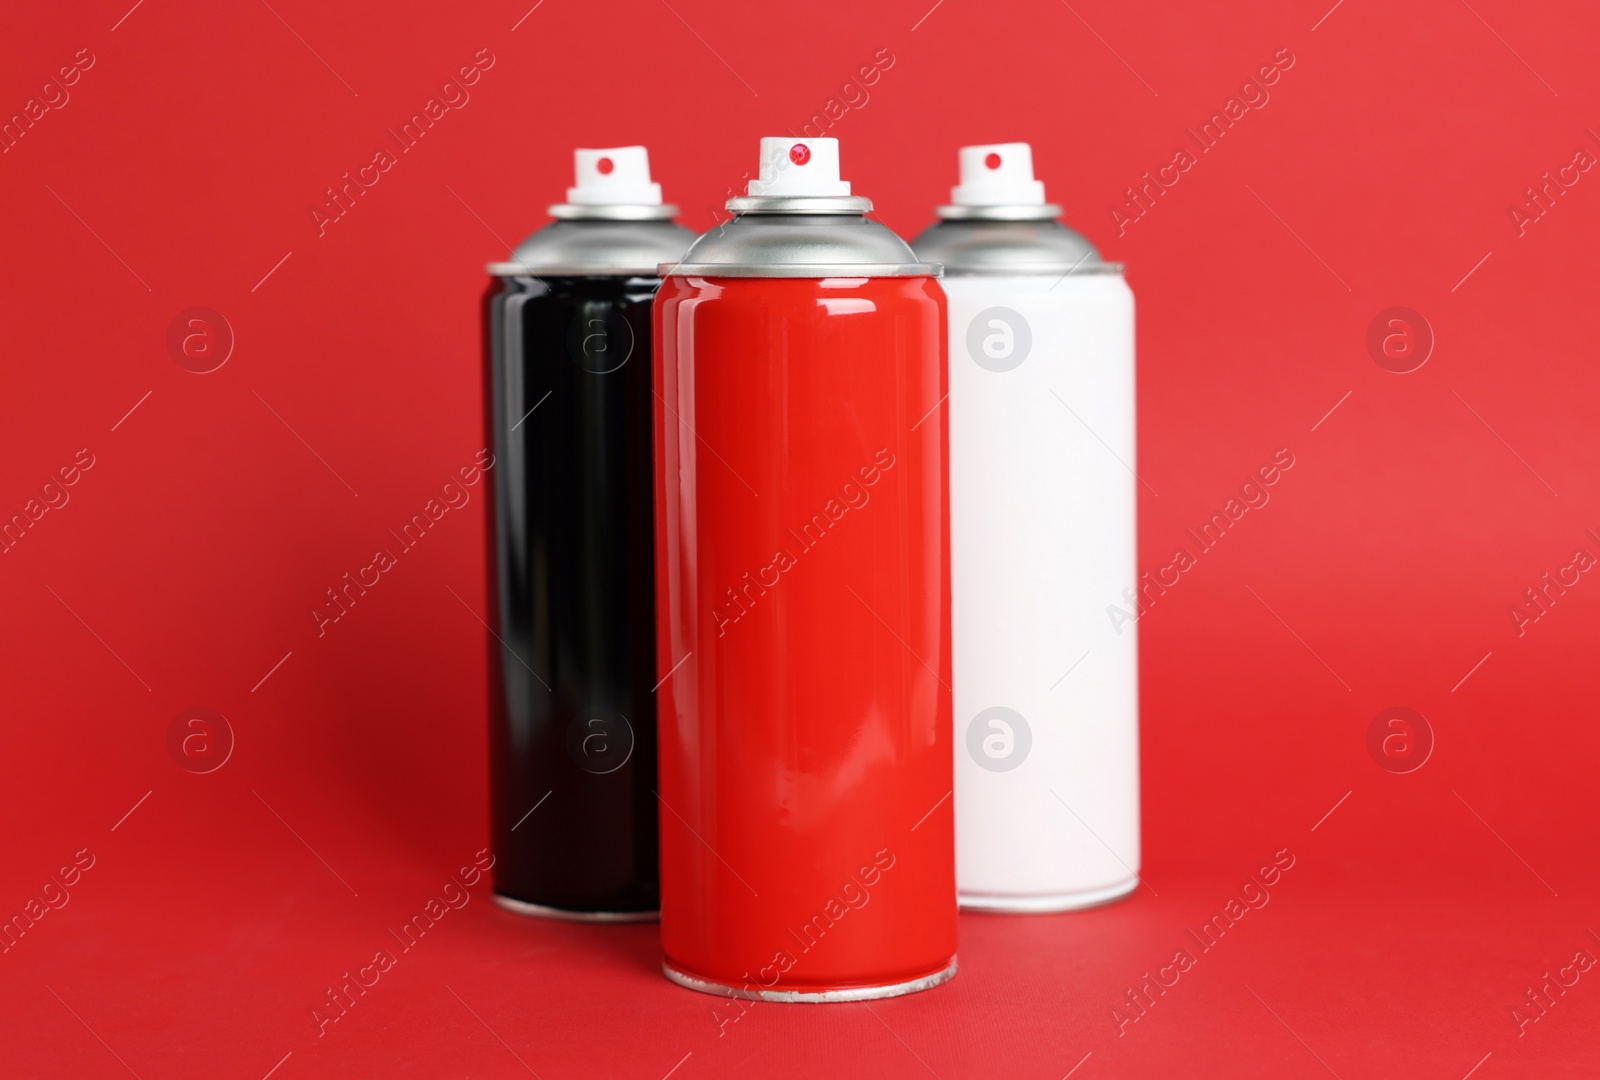 Photo of Colorful cans of spray paints on red background